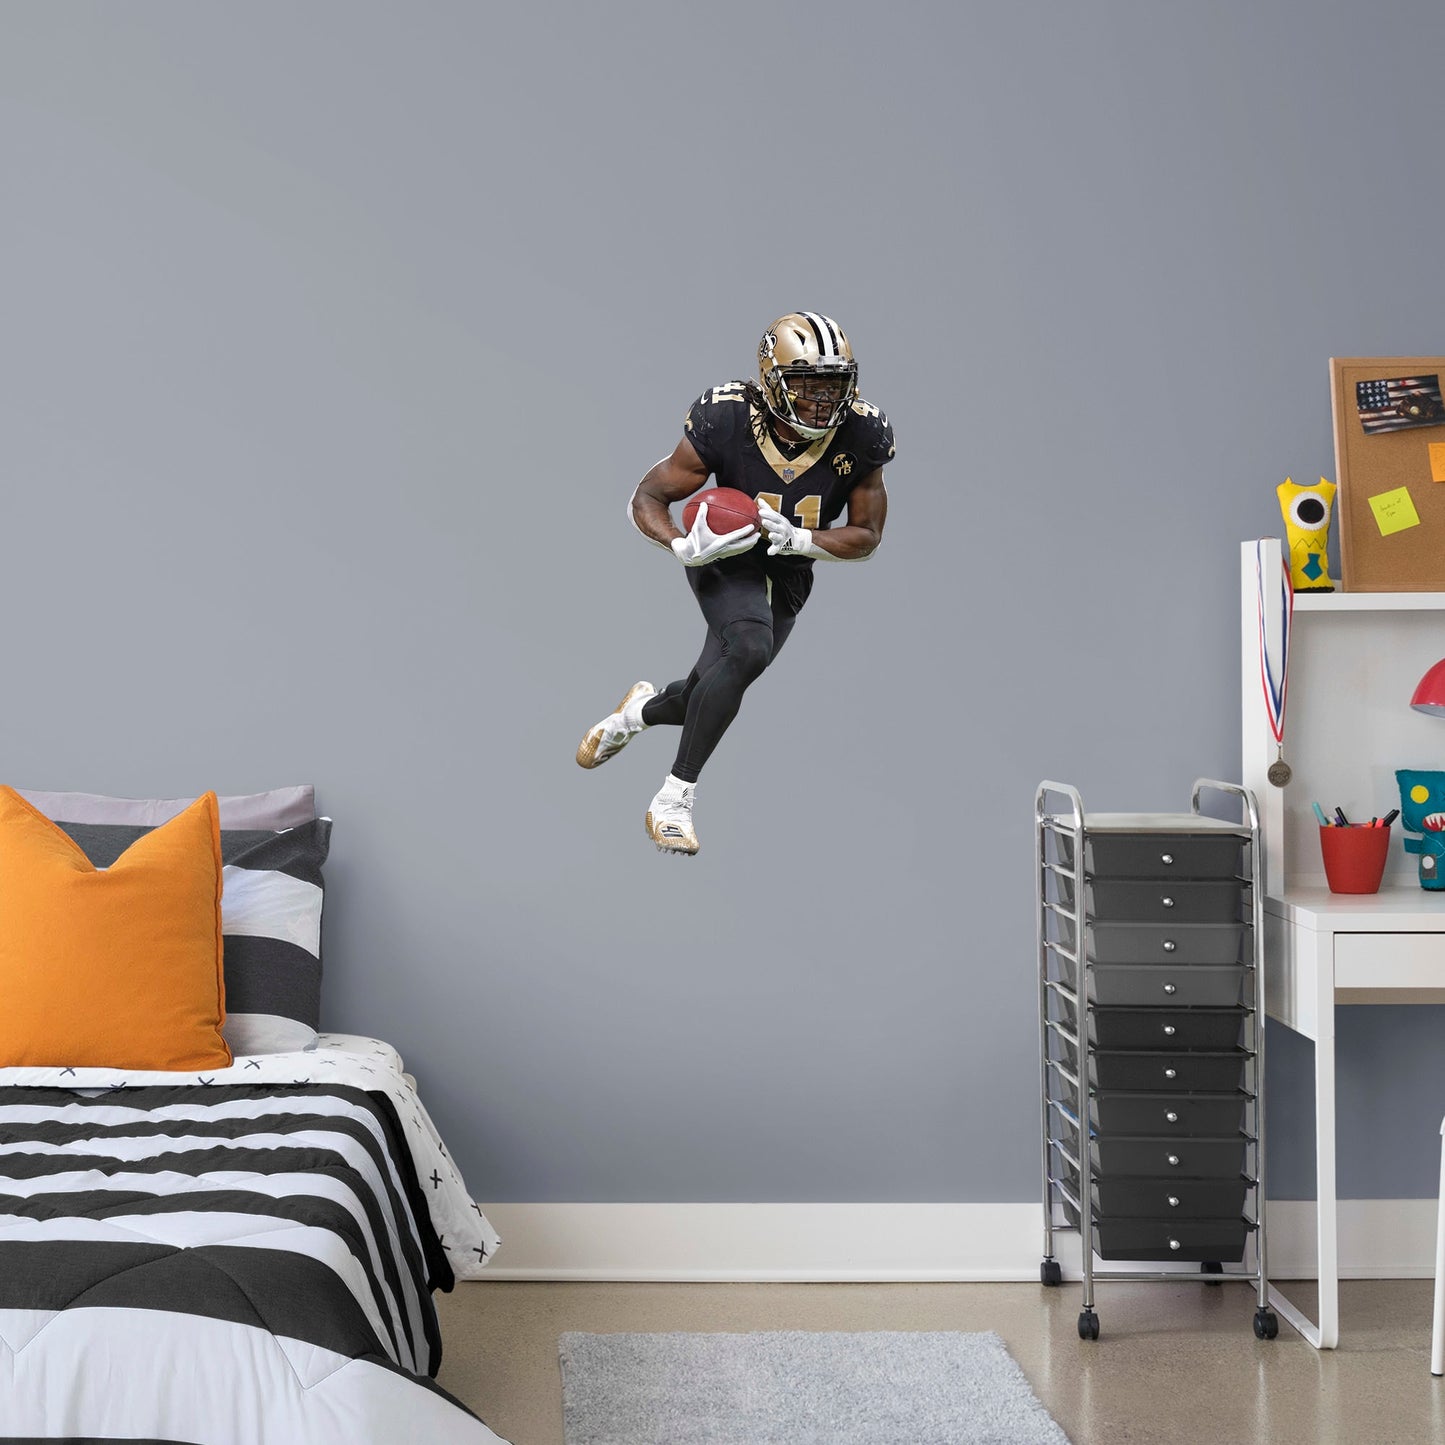 Life-Size Athlete + 2 Decals (43"W x 74"H) Who Dat! Running back Alvin Kamara of the New Orleans Saints had a stellar start to his NFL career with an impressive 32 TDs in his first two seasons - an MVP in the making. Deck your walls in black and gold with a high-grade vinyl decal of the Saints' #41. It won't fade or tear, so remove it and reuse it wherever you watch the big game. Geaux Saints!